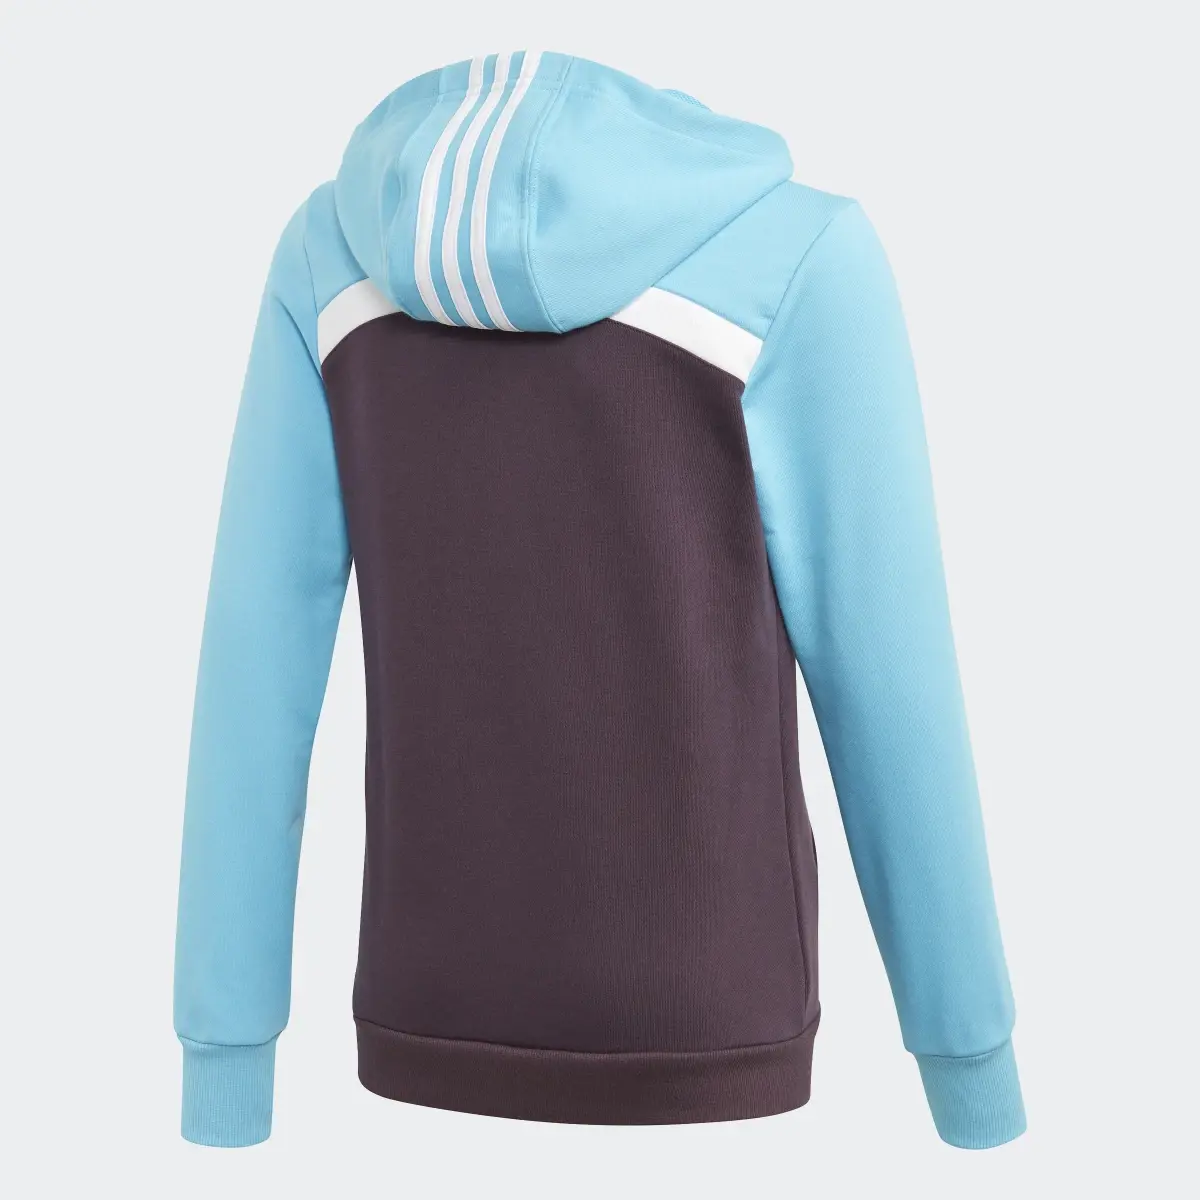 Adidas Hooded Cotton Track Suit. 3